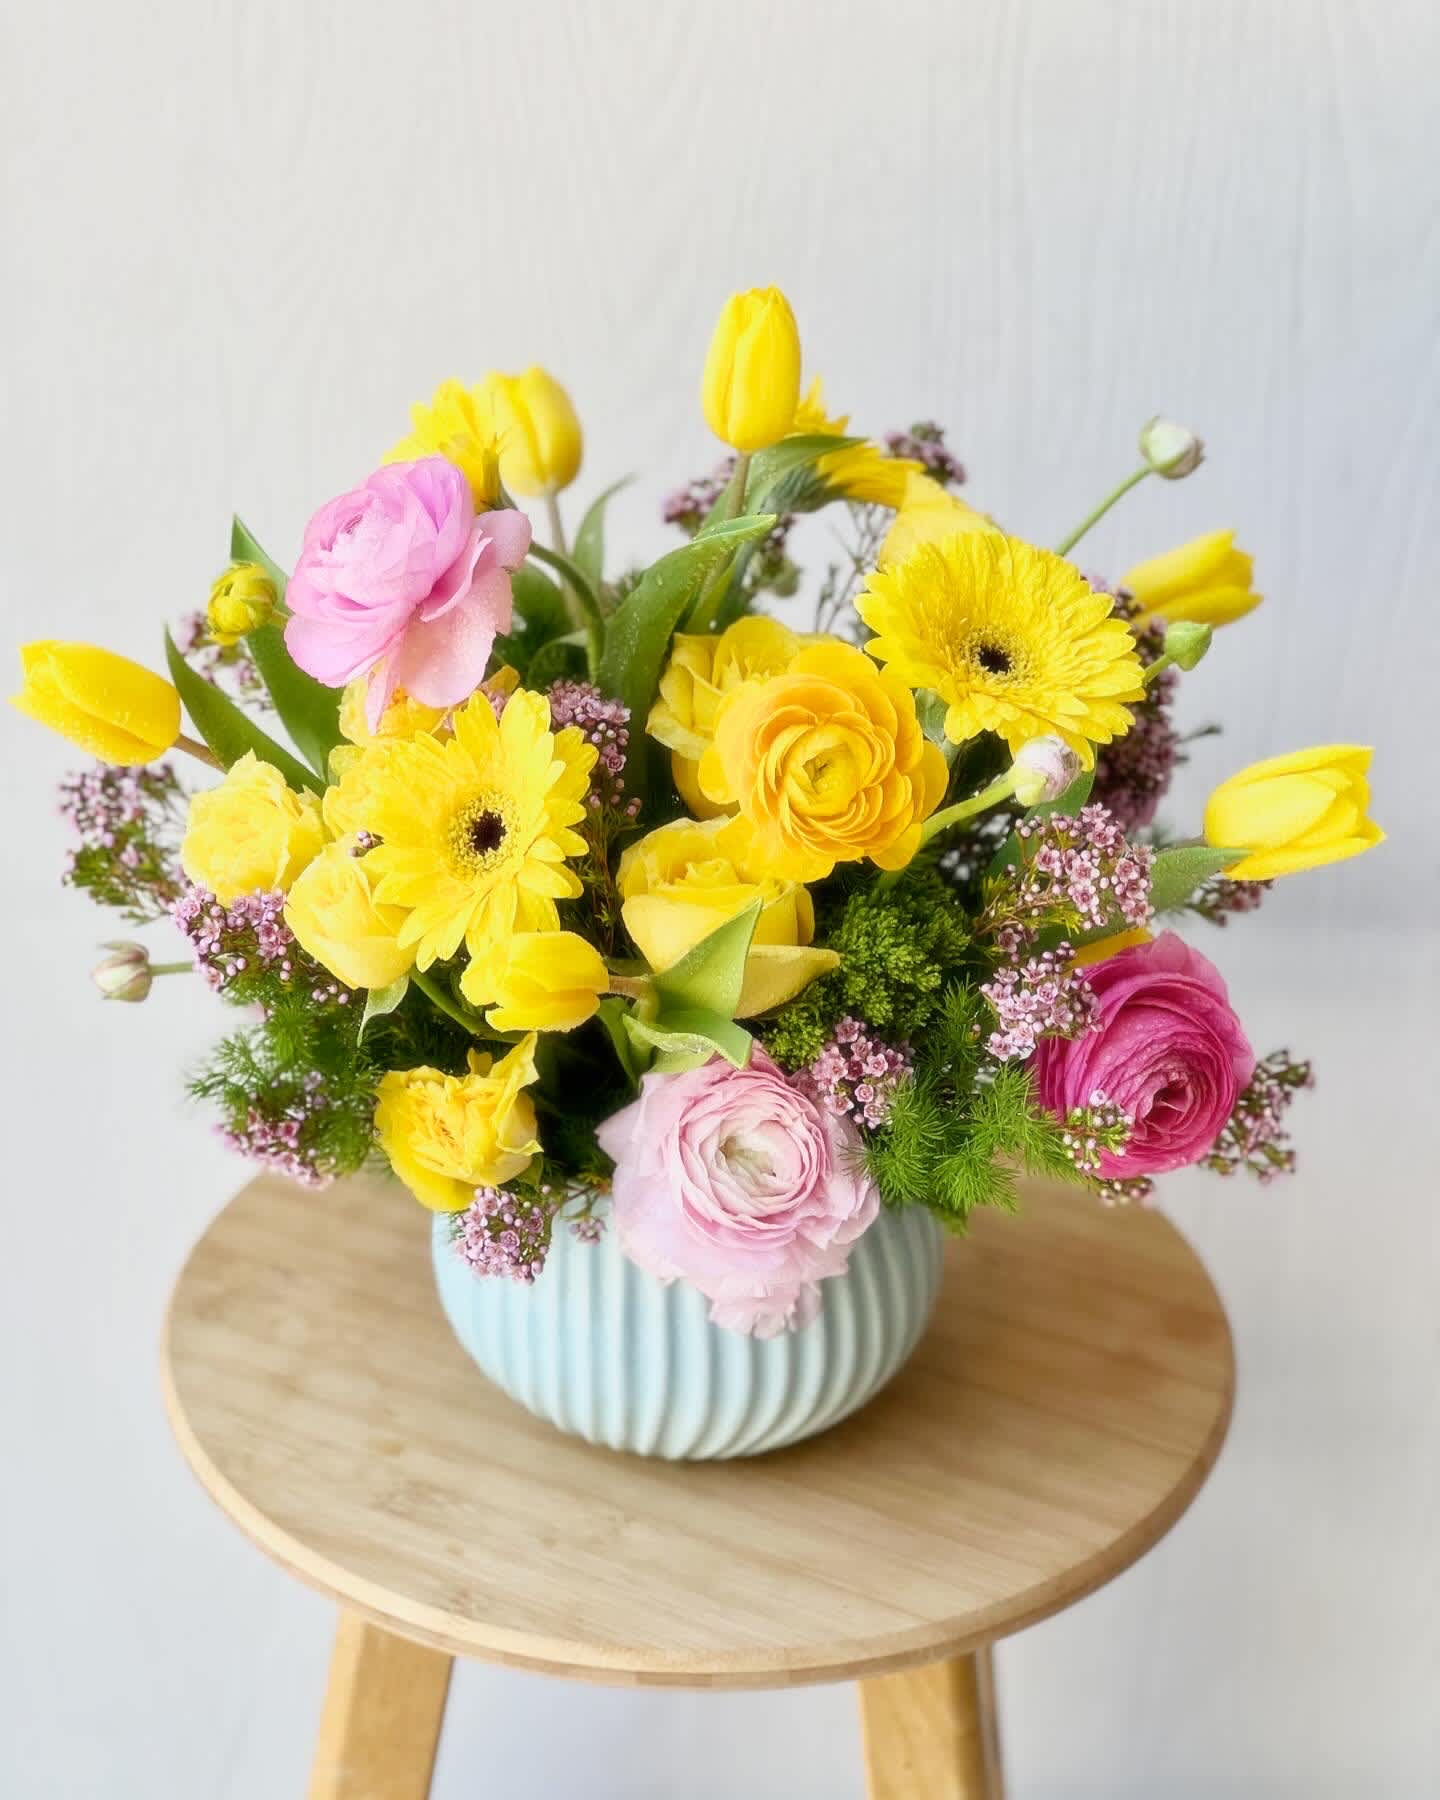 EC103 Spring Harmony - Introducing our Spring Harmony arrangement! Bursting with the colors of spring, this charming arrangement features sunny yellow tulips, soft pink lisianthus, and delicate yellow roses in a beautiful blue ceramic vase. It's the perfect way to bring the freshness and joy of spring into any space. Brighten your day with this delightful ensemble!